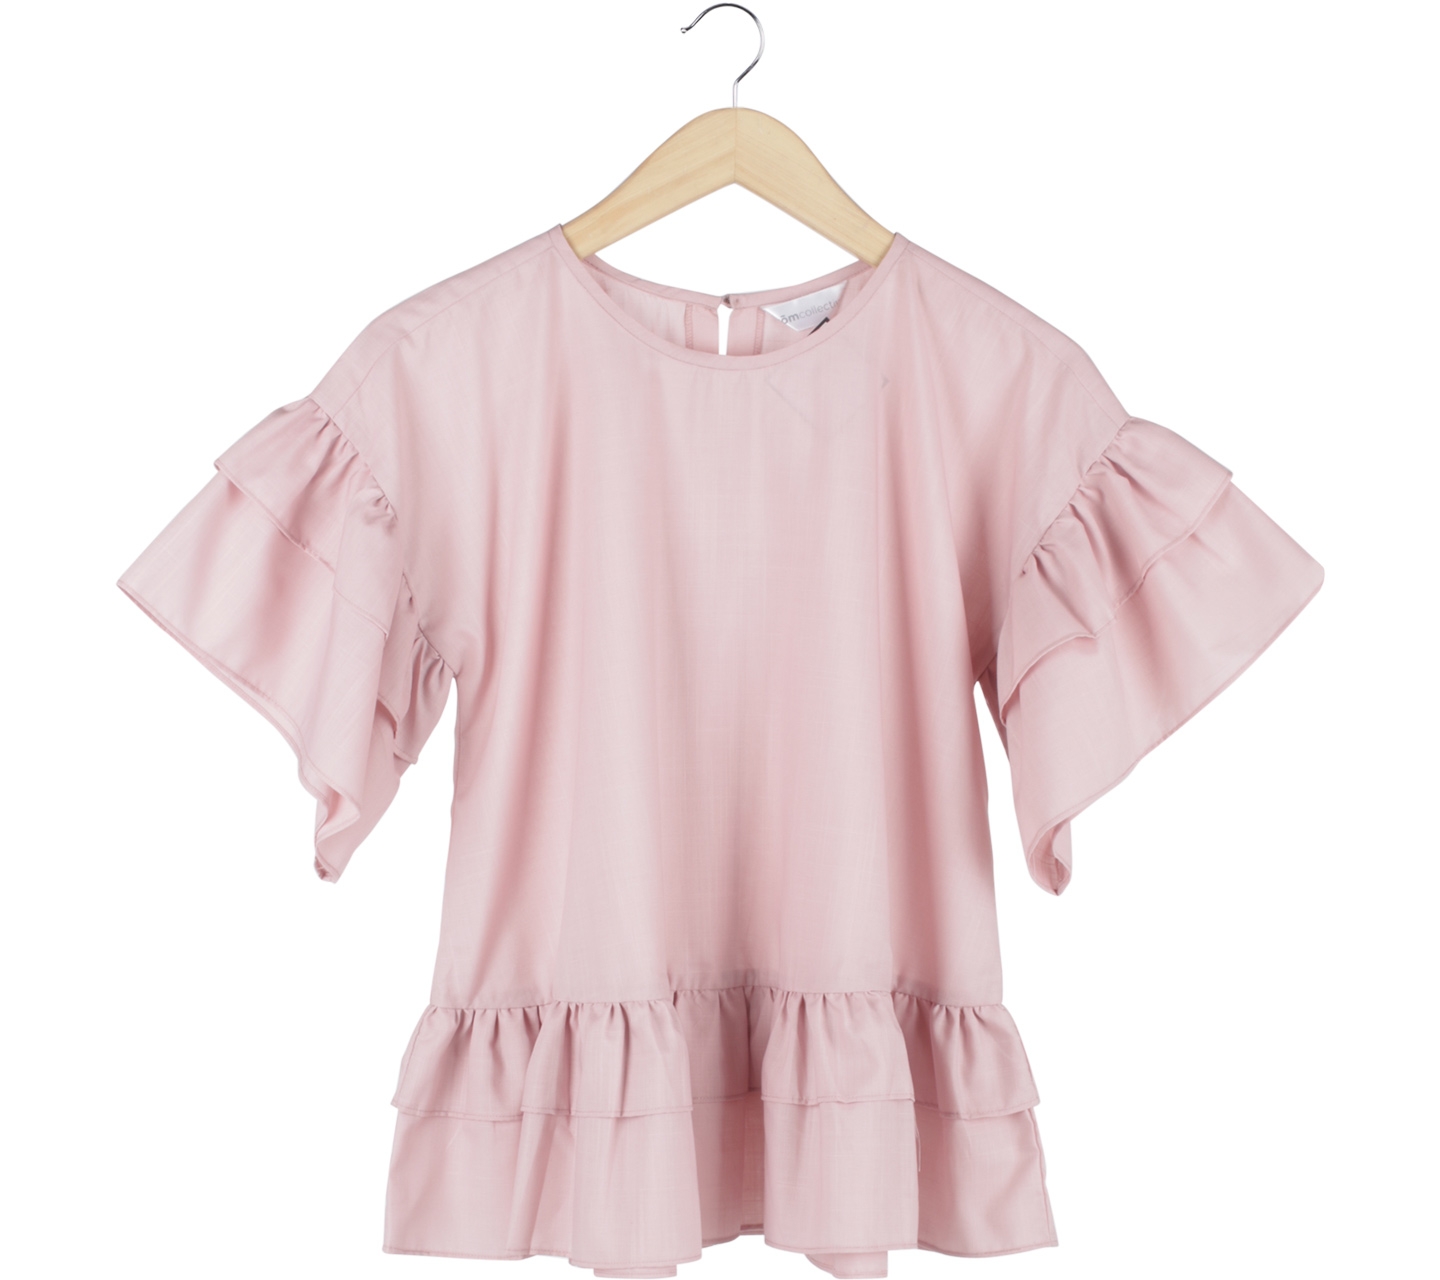 Krom Collective Pink Ruffle Blouse